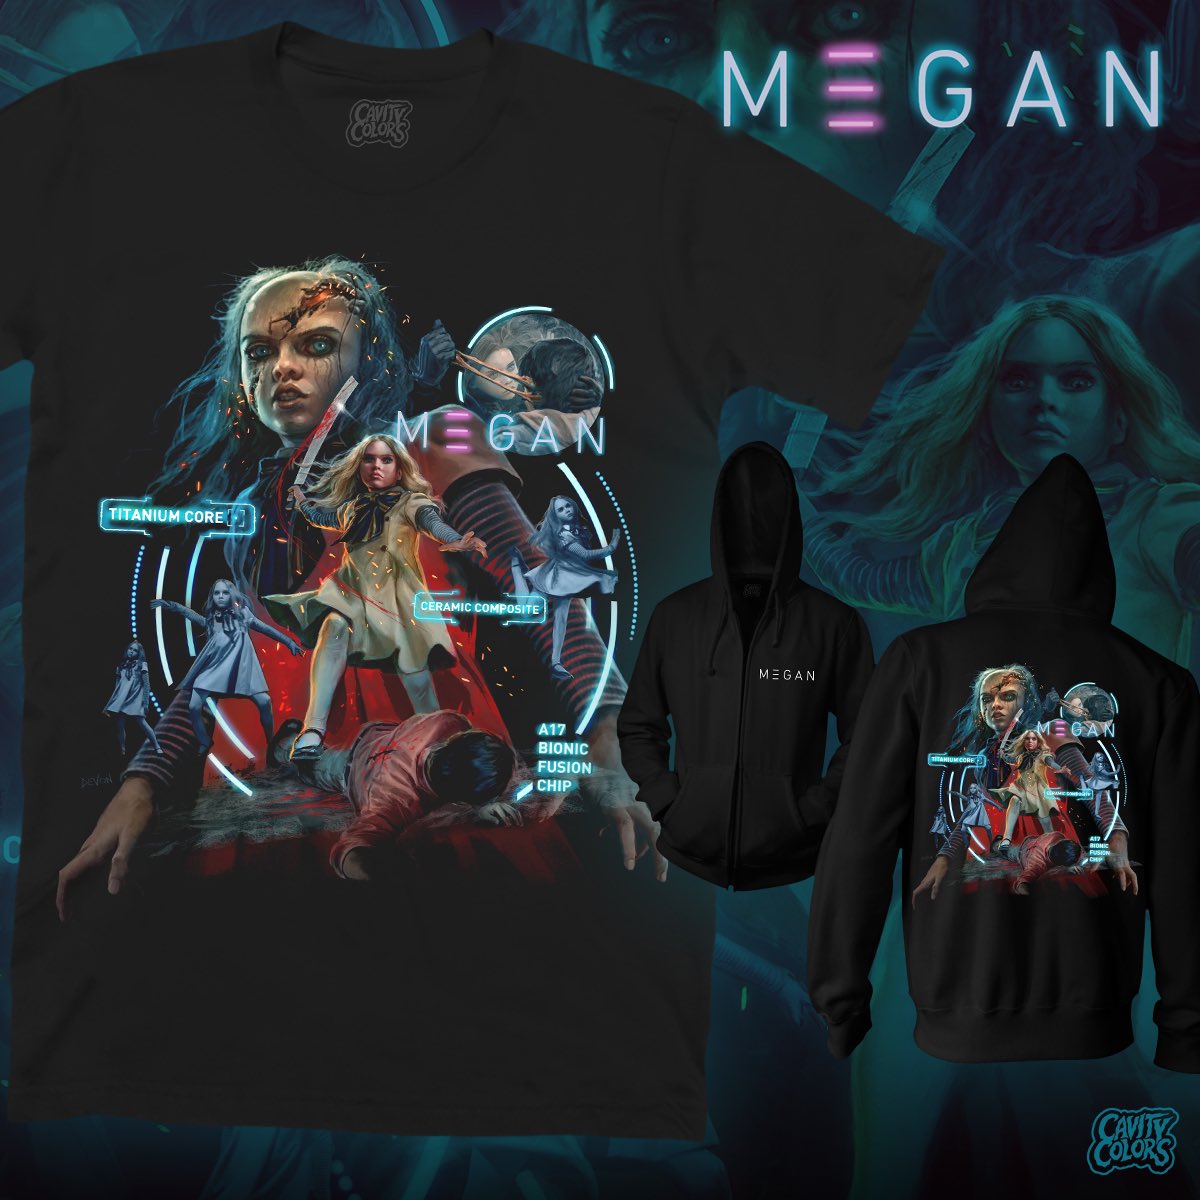 👩🏼 AVAILABLE NOW! ⚡️ All new officially licensed M3GAN tee & zip-up hoodies! You should probably run… and get yours before it’s too late. SLAY! 💅 SHOP 👉 CAVITYCOLORS.COM 💬What are you getting? Let us know!